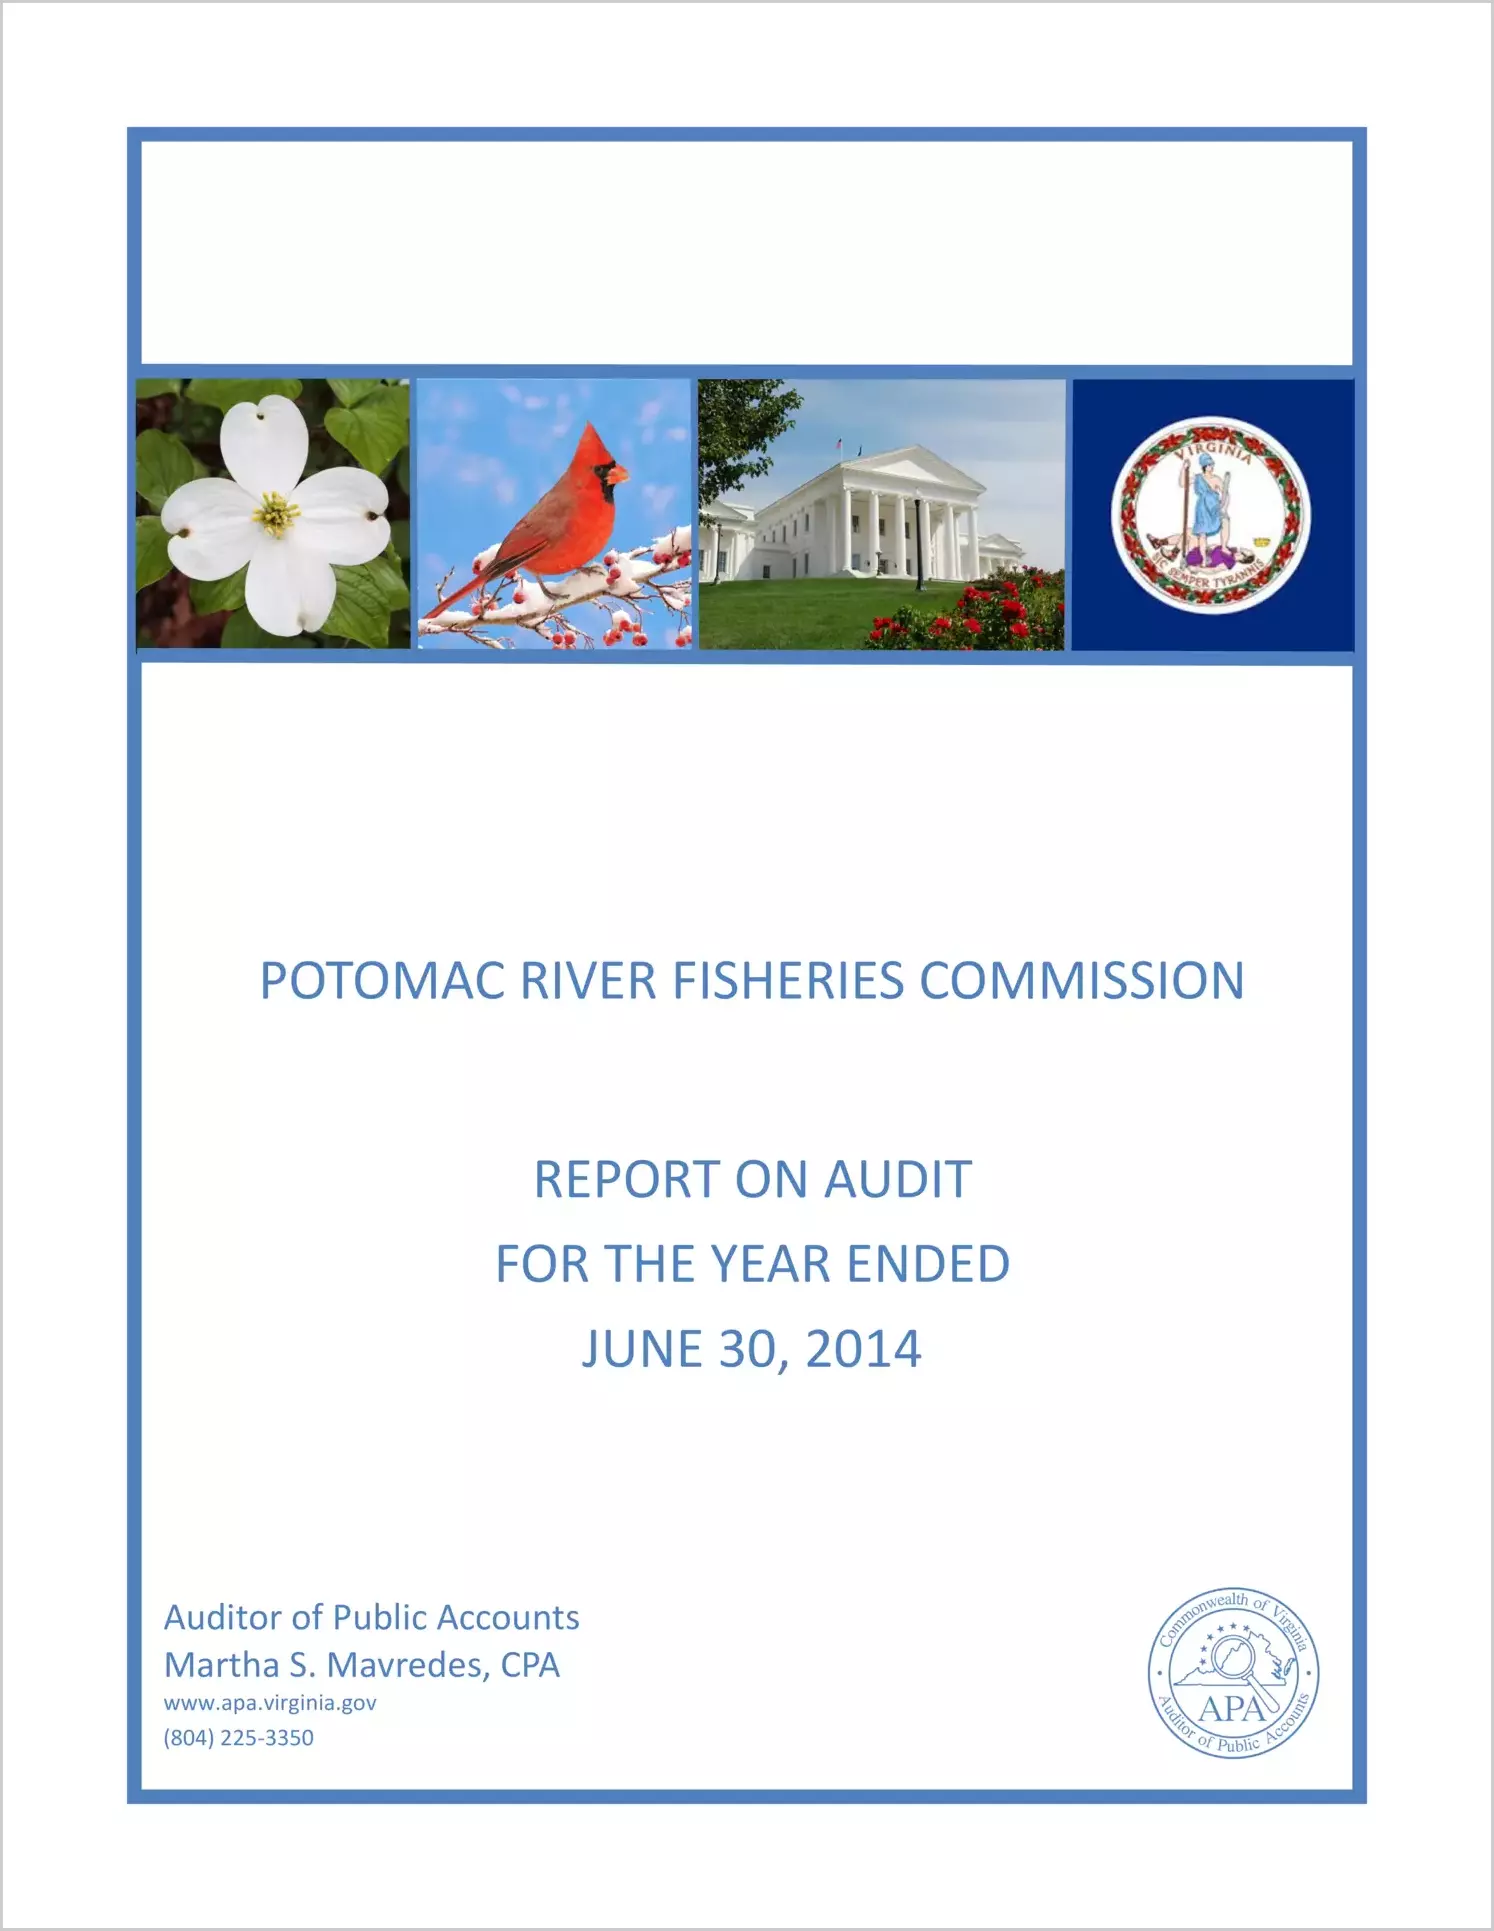 Potomac River Fisheries Commission report on audit for the year ended June 30, 2014